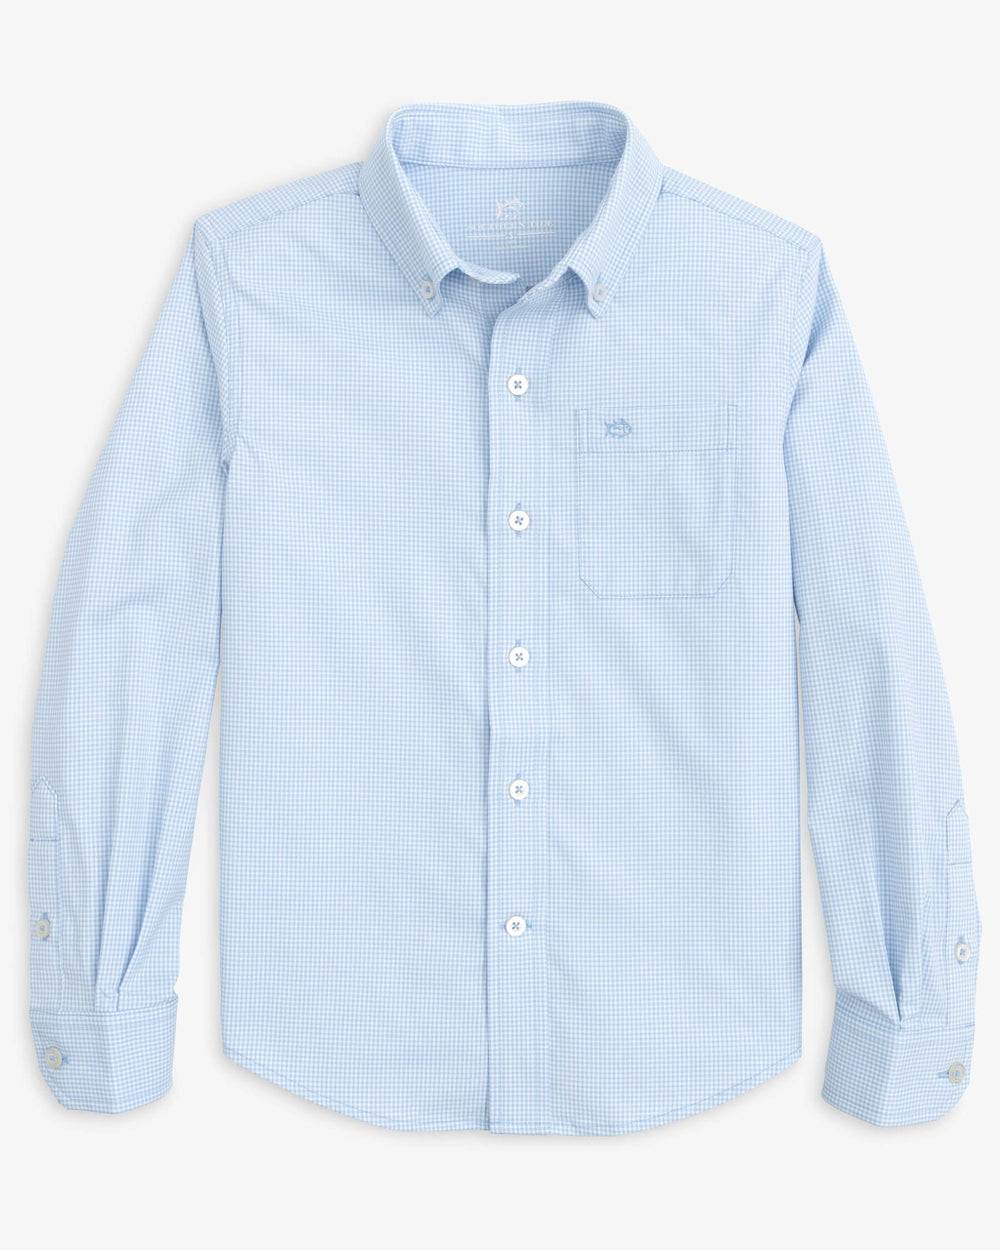 The front view of the Southern Tide Boys mini gingham intercoastal buttn down shirt by Southern Tide - Tide Blue